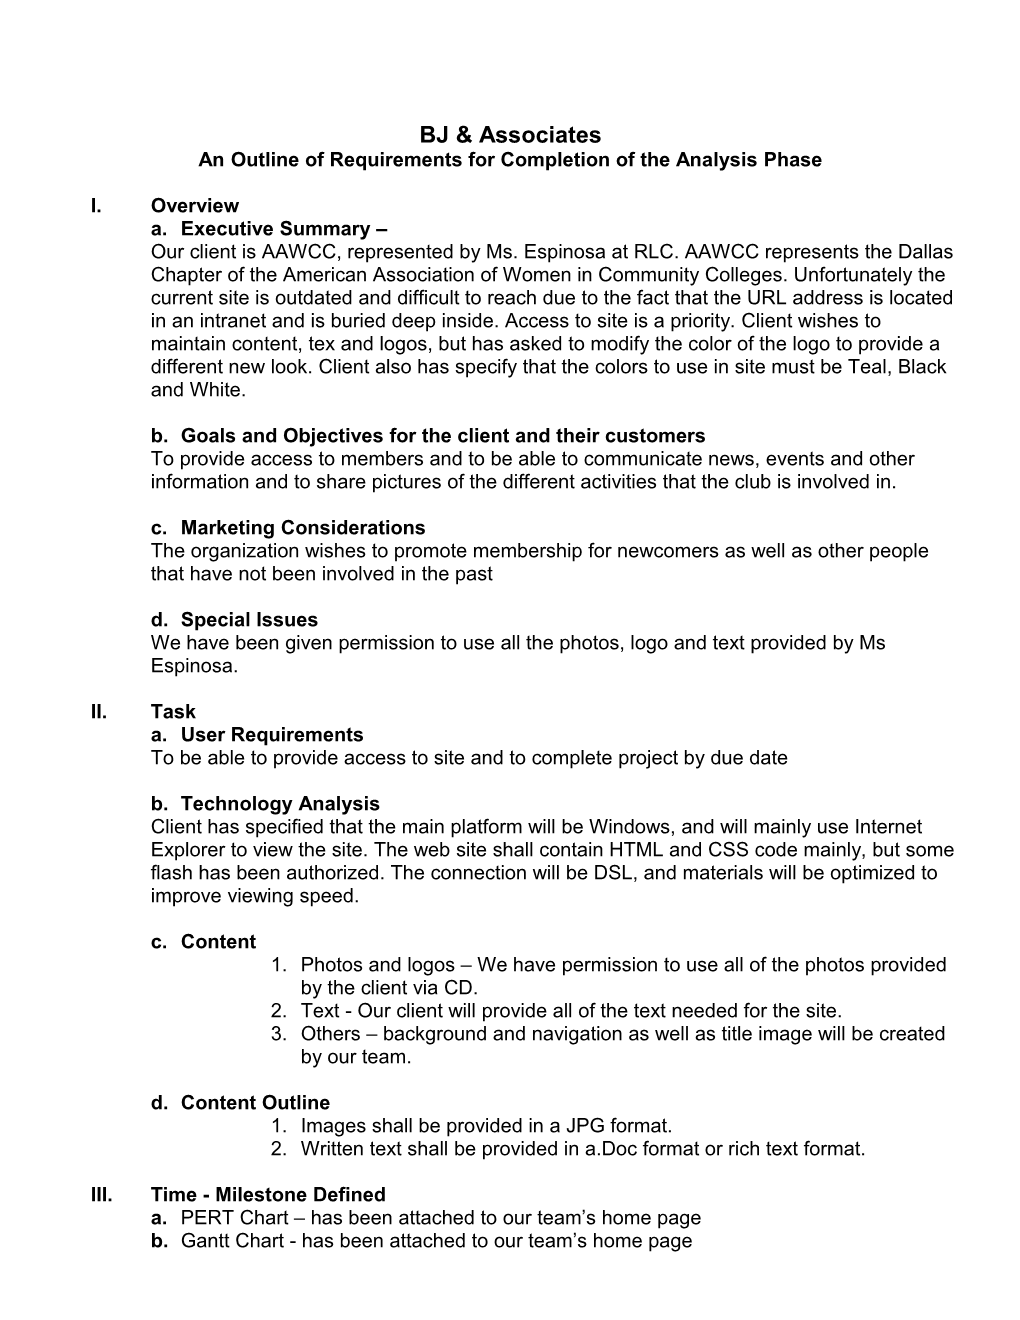 An Outline of Requirements for Completion of the Analysis Phase